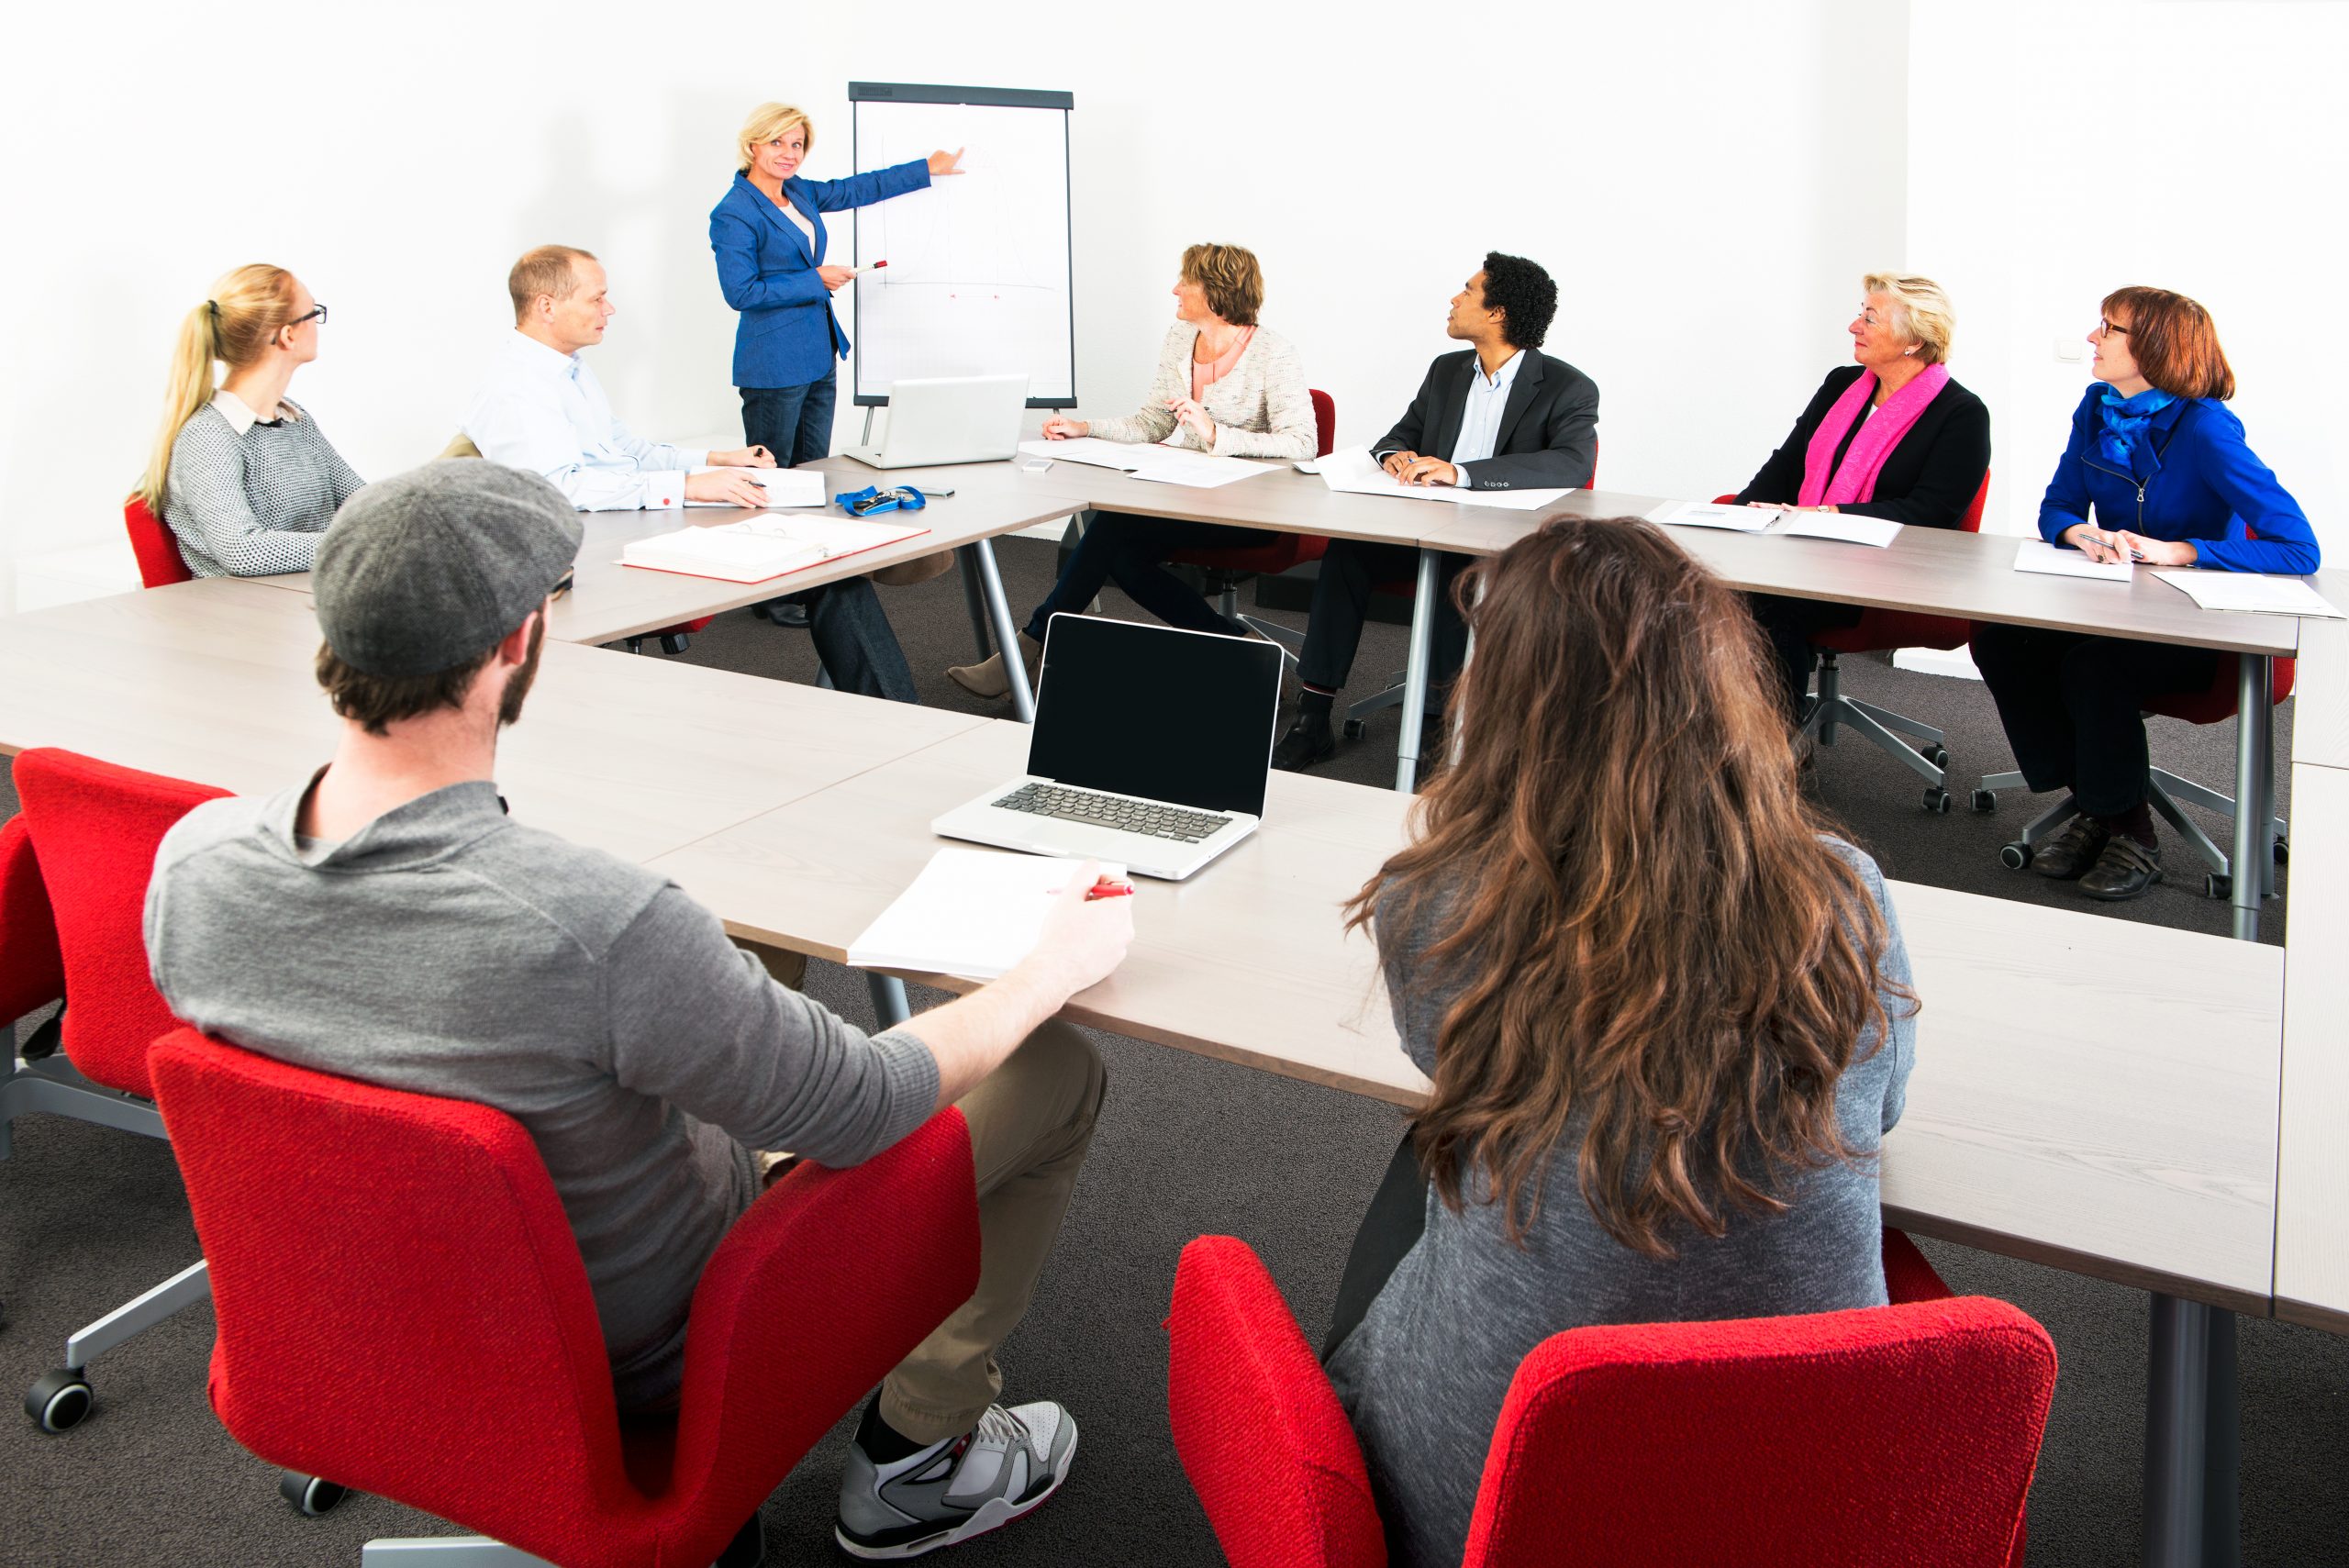 Several businesspeople meeting in a spaceous meeting room for a presentation